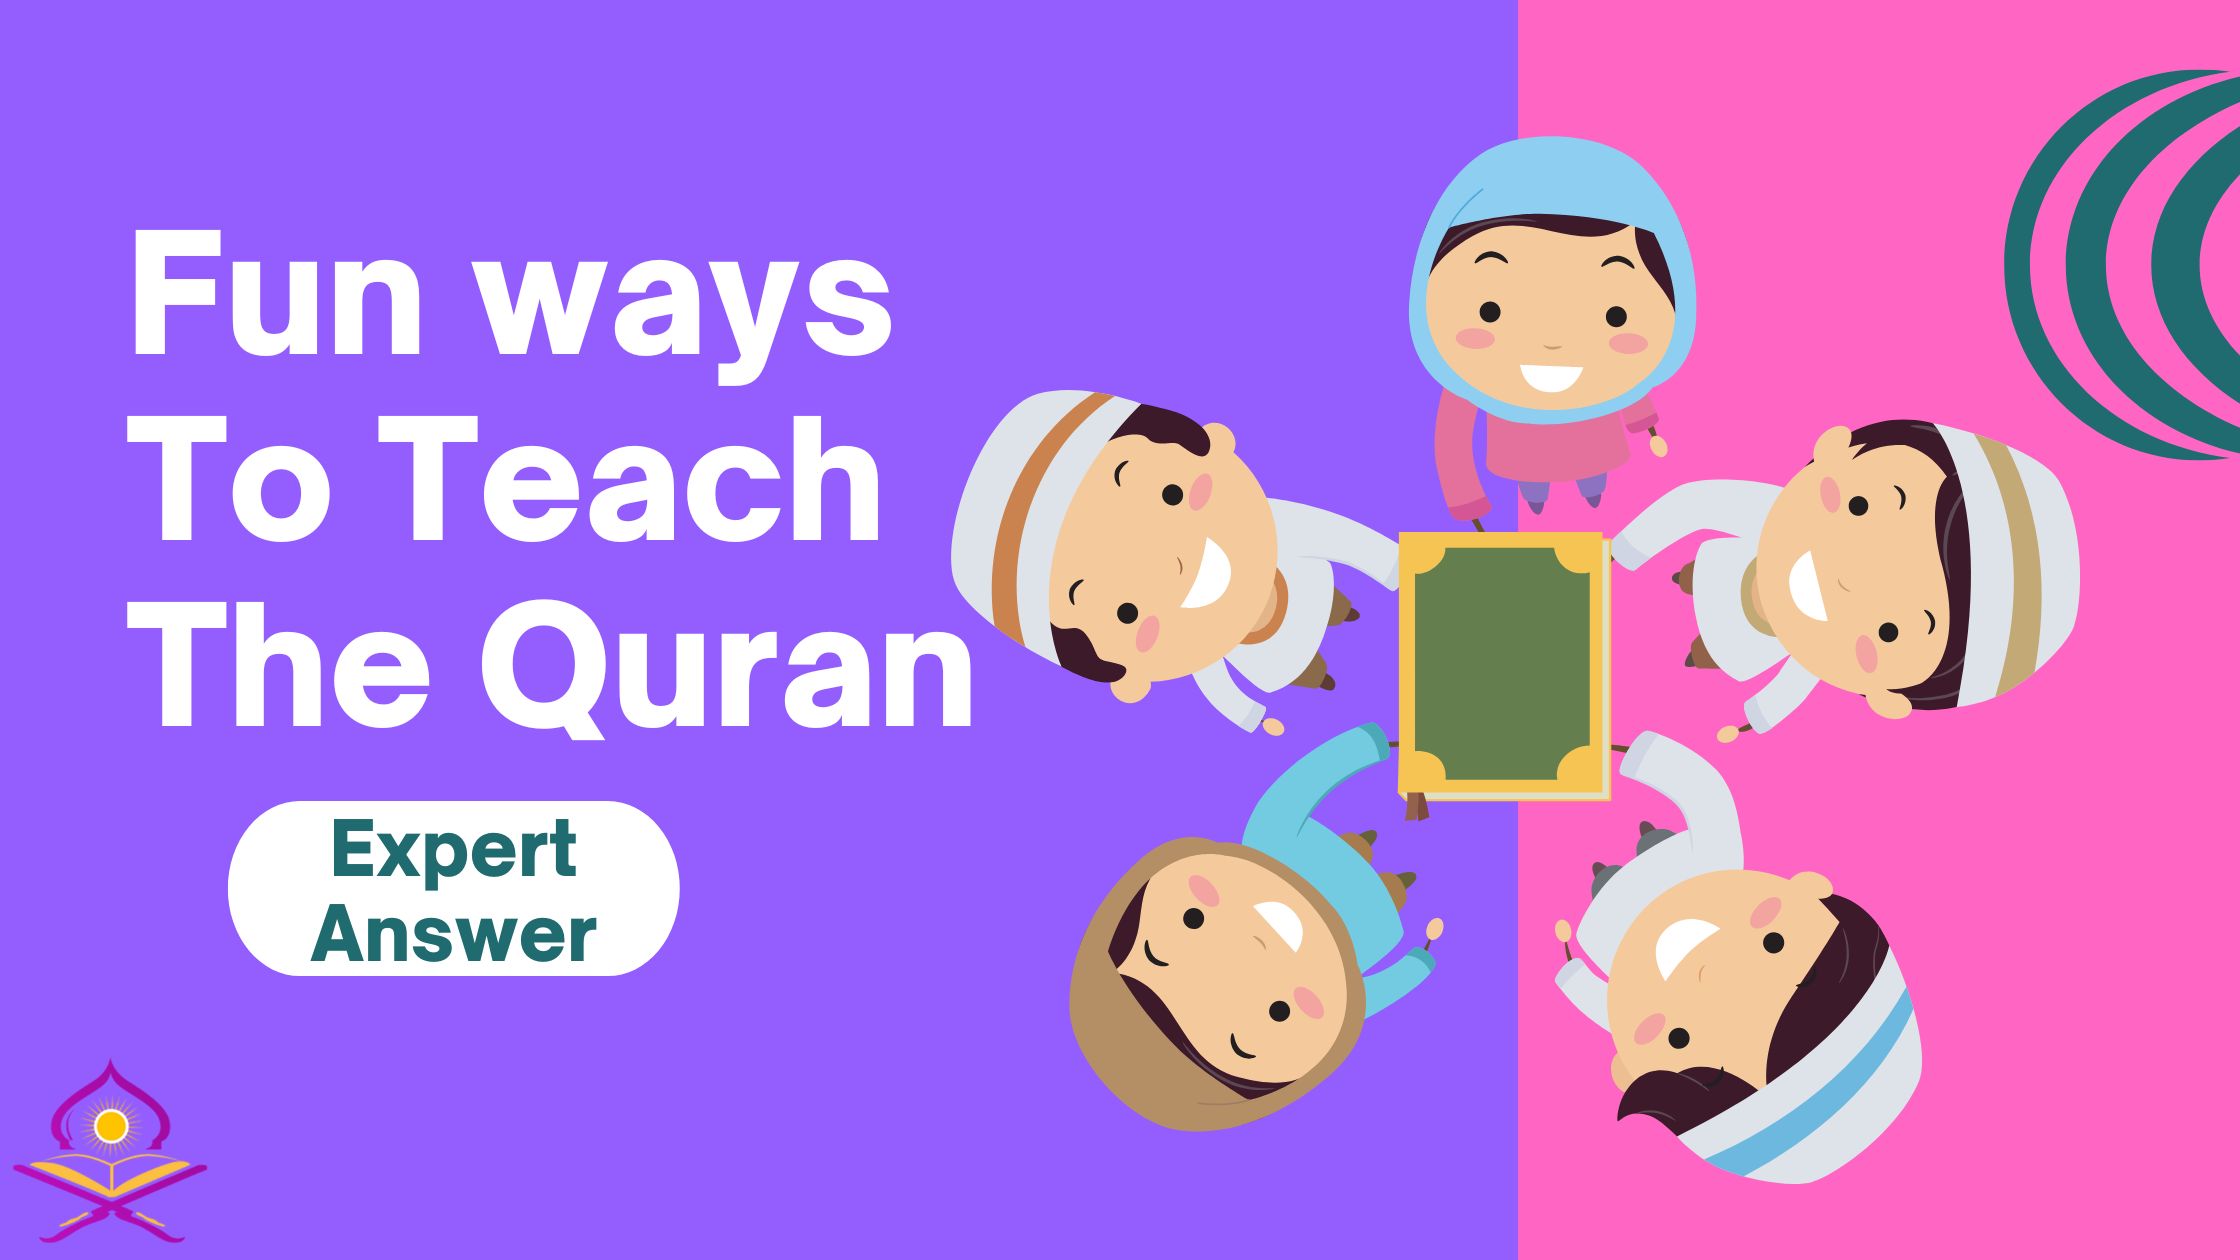 Learn Quran Reading Online - Online Quran Classes, Learn Quran Easy and Fast